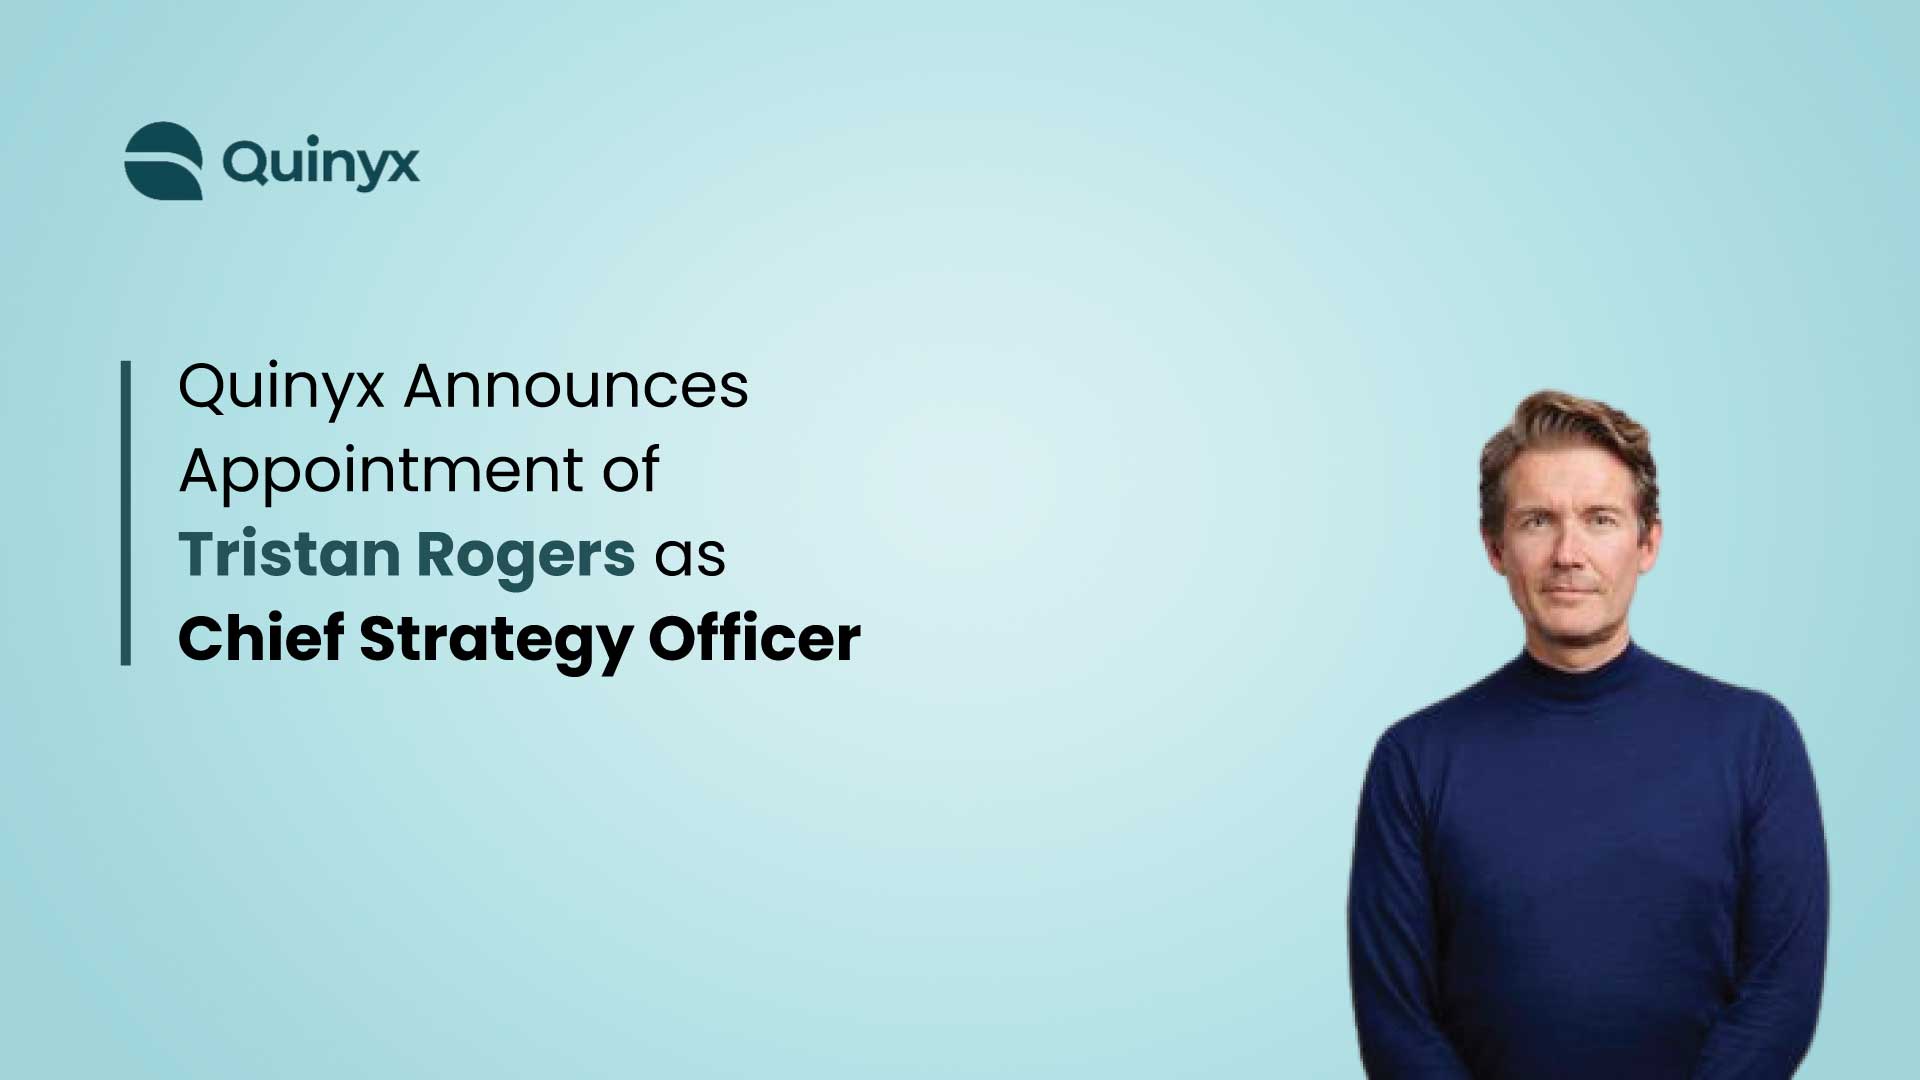 Quinyx Announces the Appointment of Tristan Rogers as Chief Strategy Officer